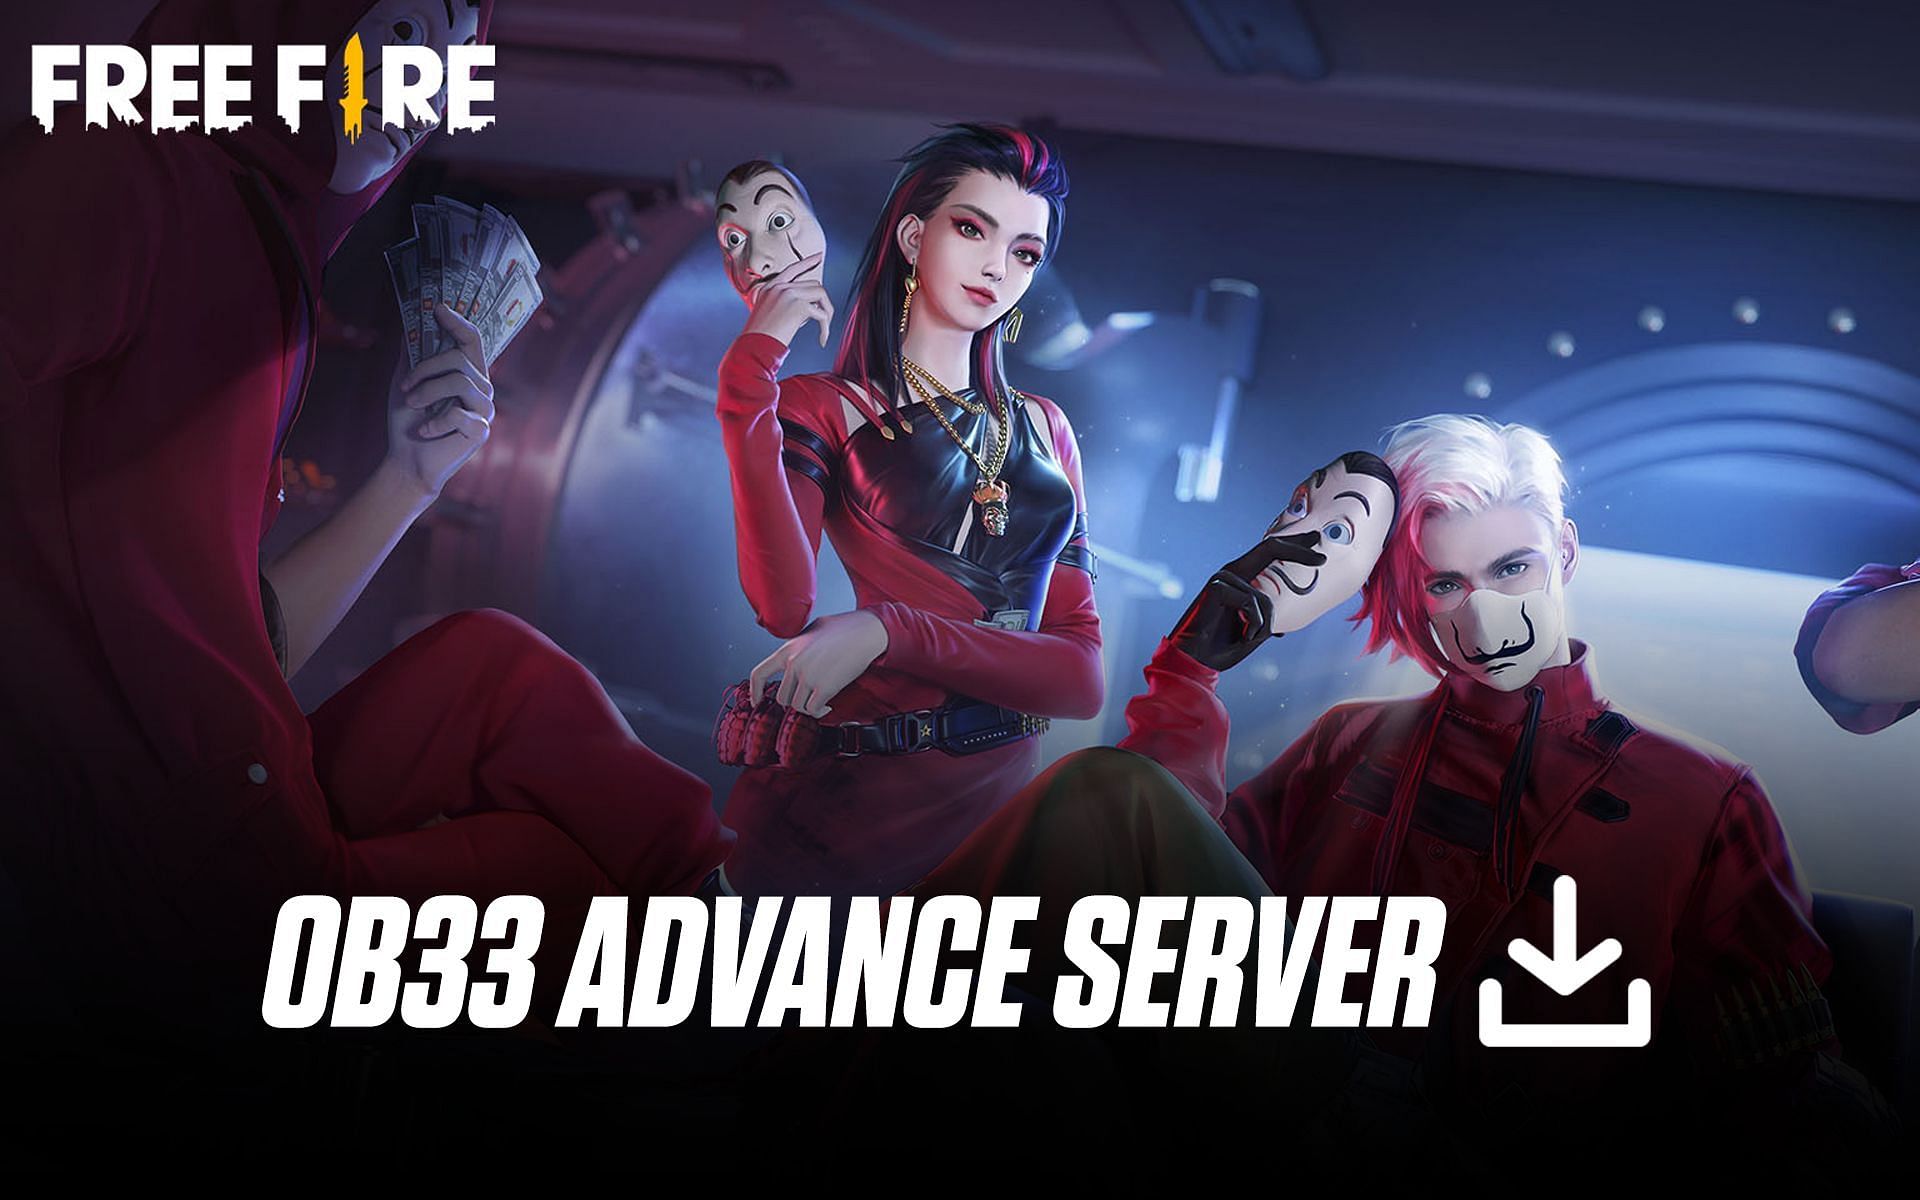 The OB33 Advance Server is available for download (Image via Sportskeeda)